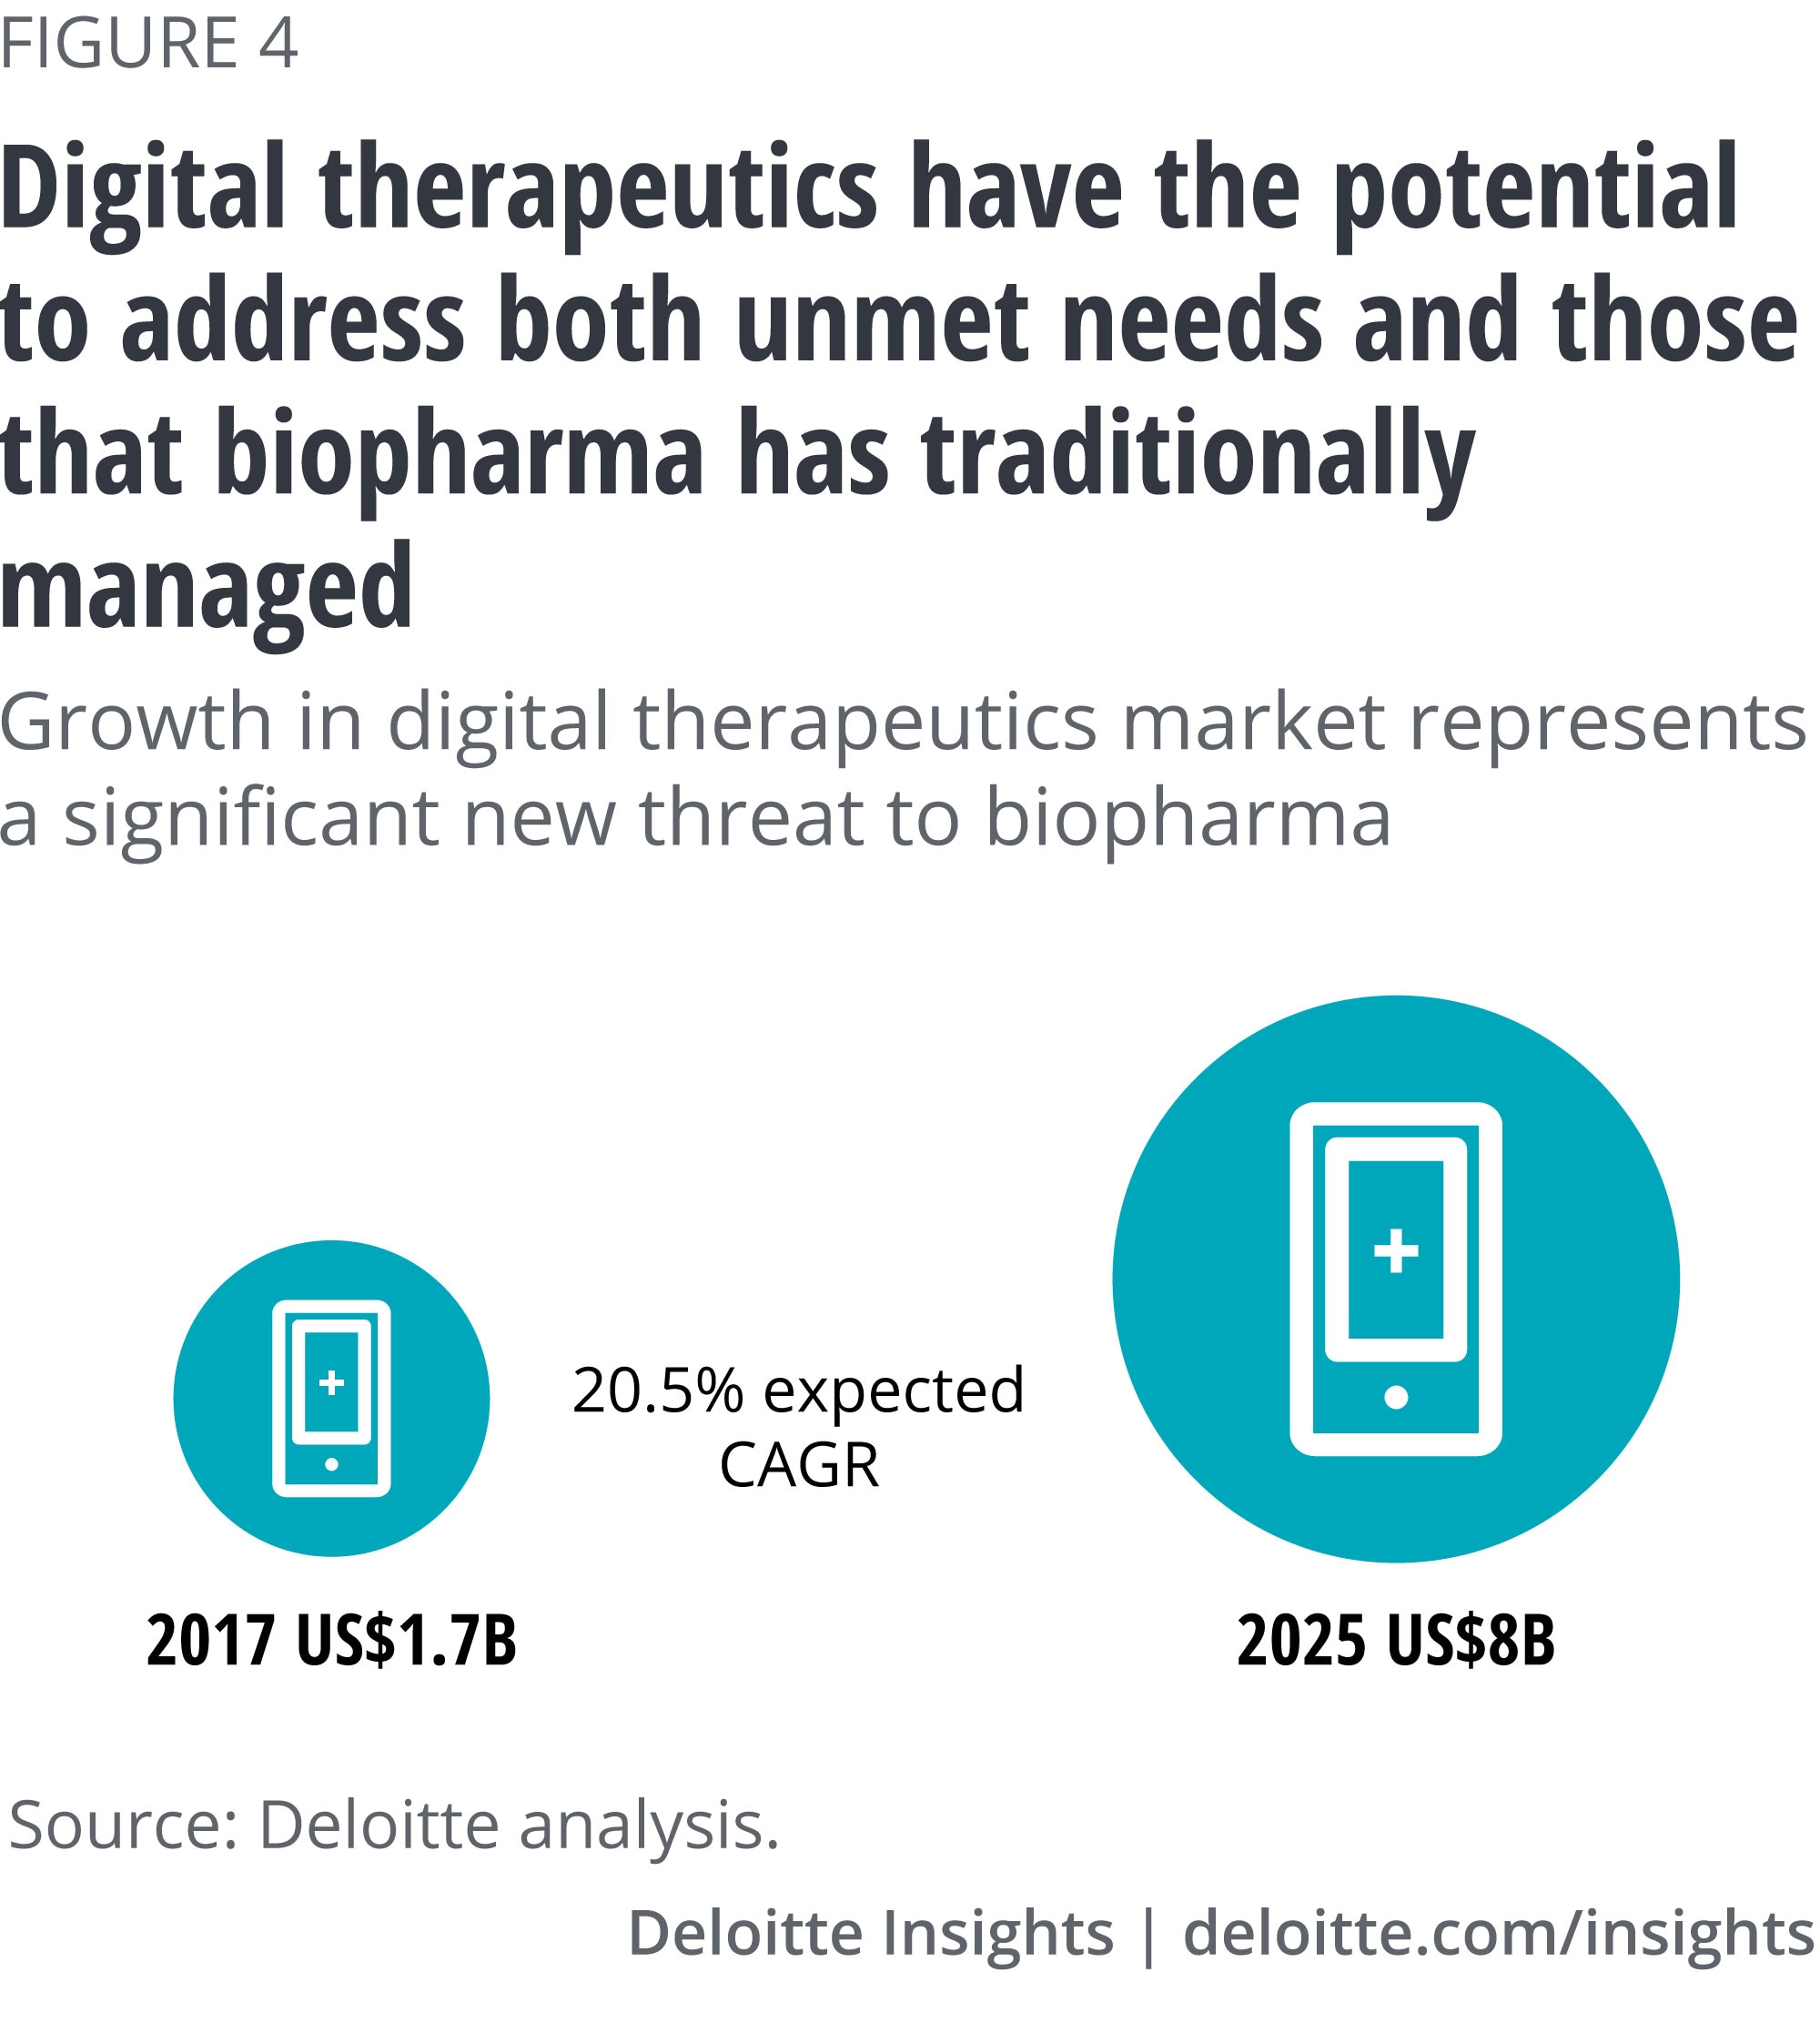 Digital therapeutics have the potential to address both unmet needs and those that bippharma has traditionally managed